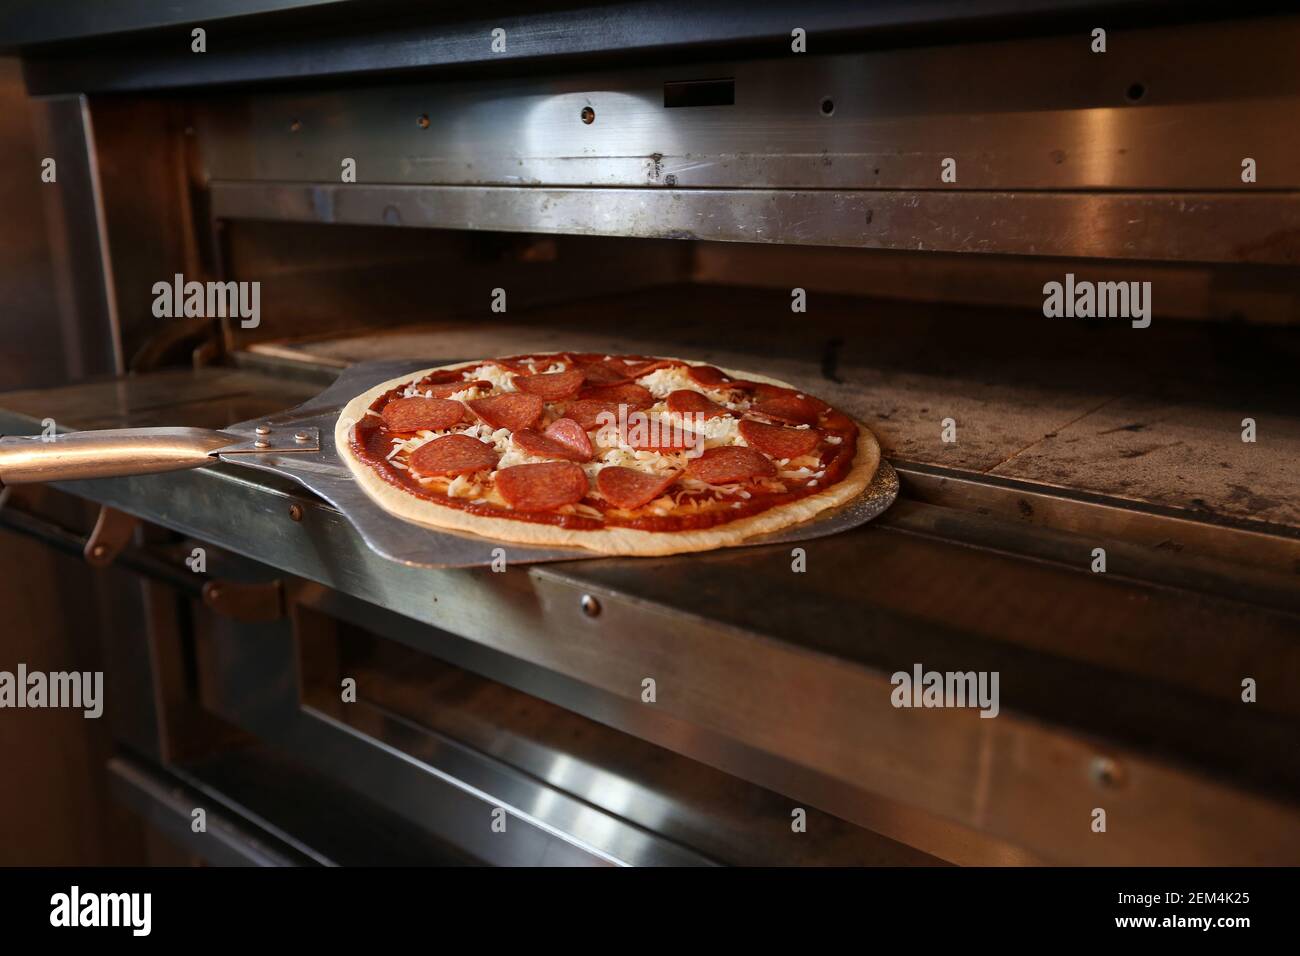 A pepperoni pizza being put into the oven to cook in a restaurant Stock Photo